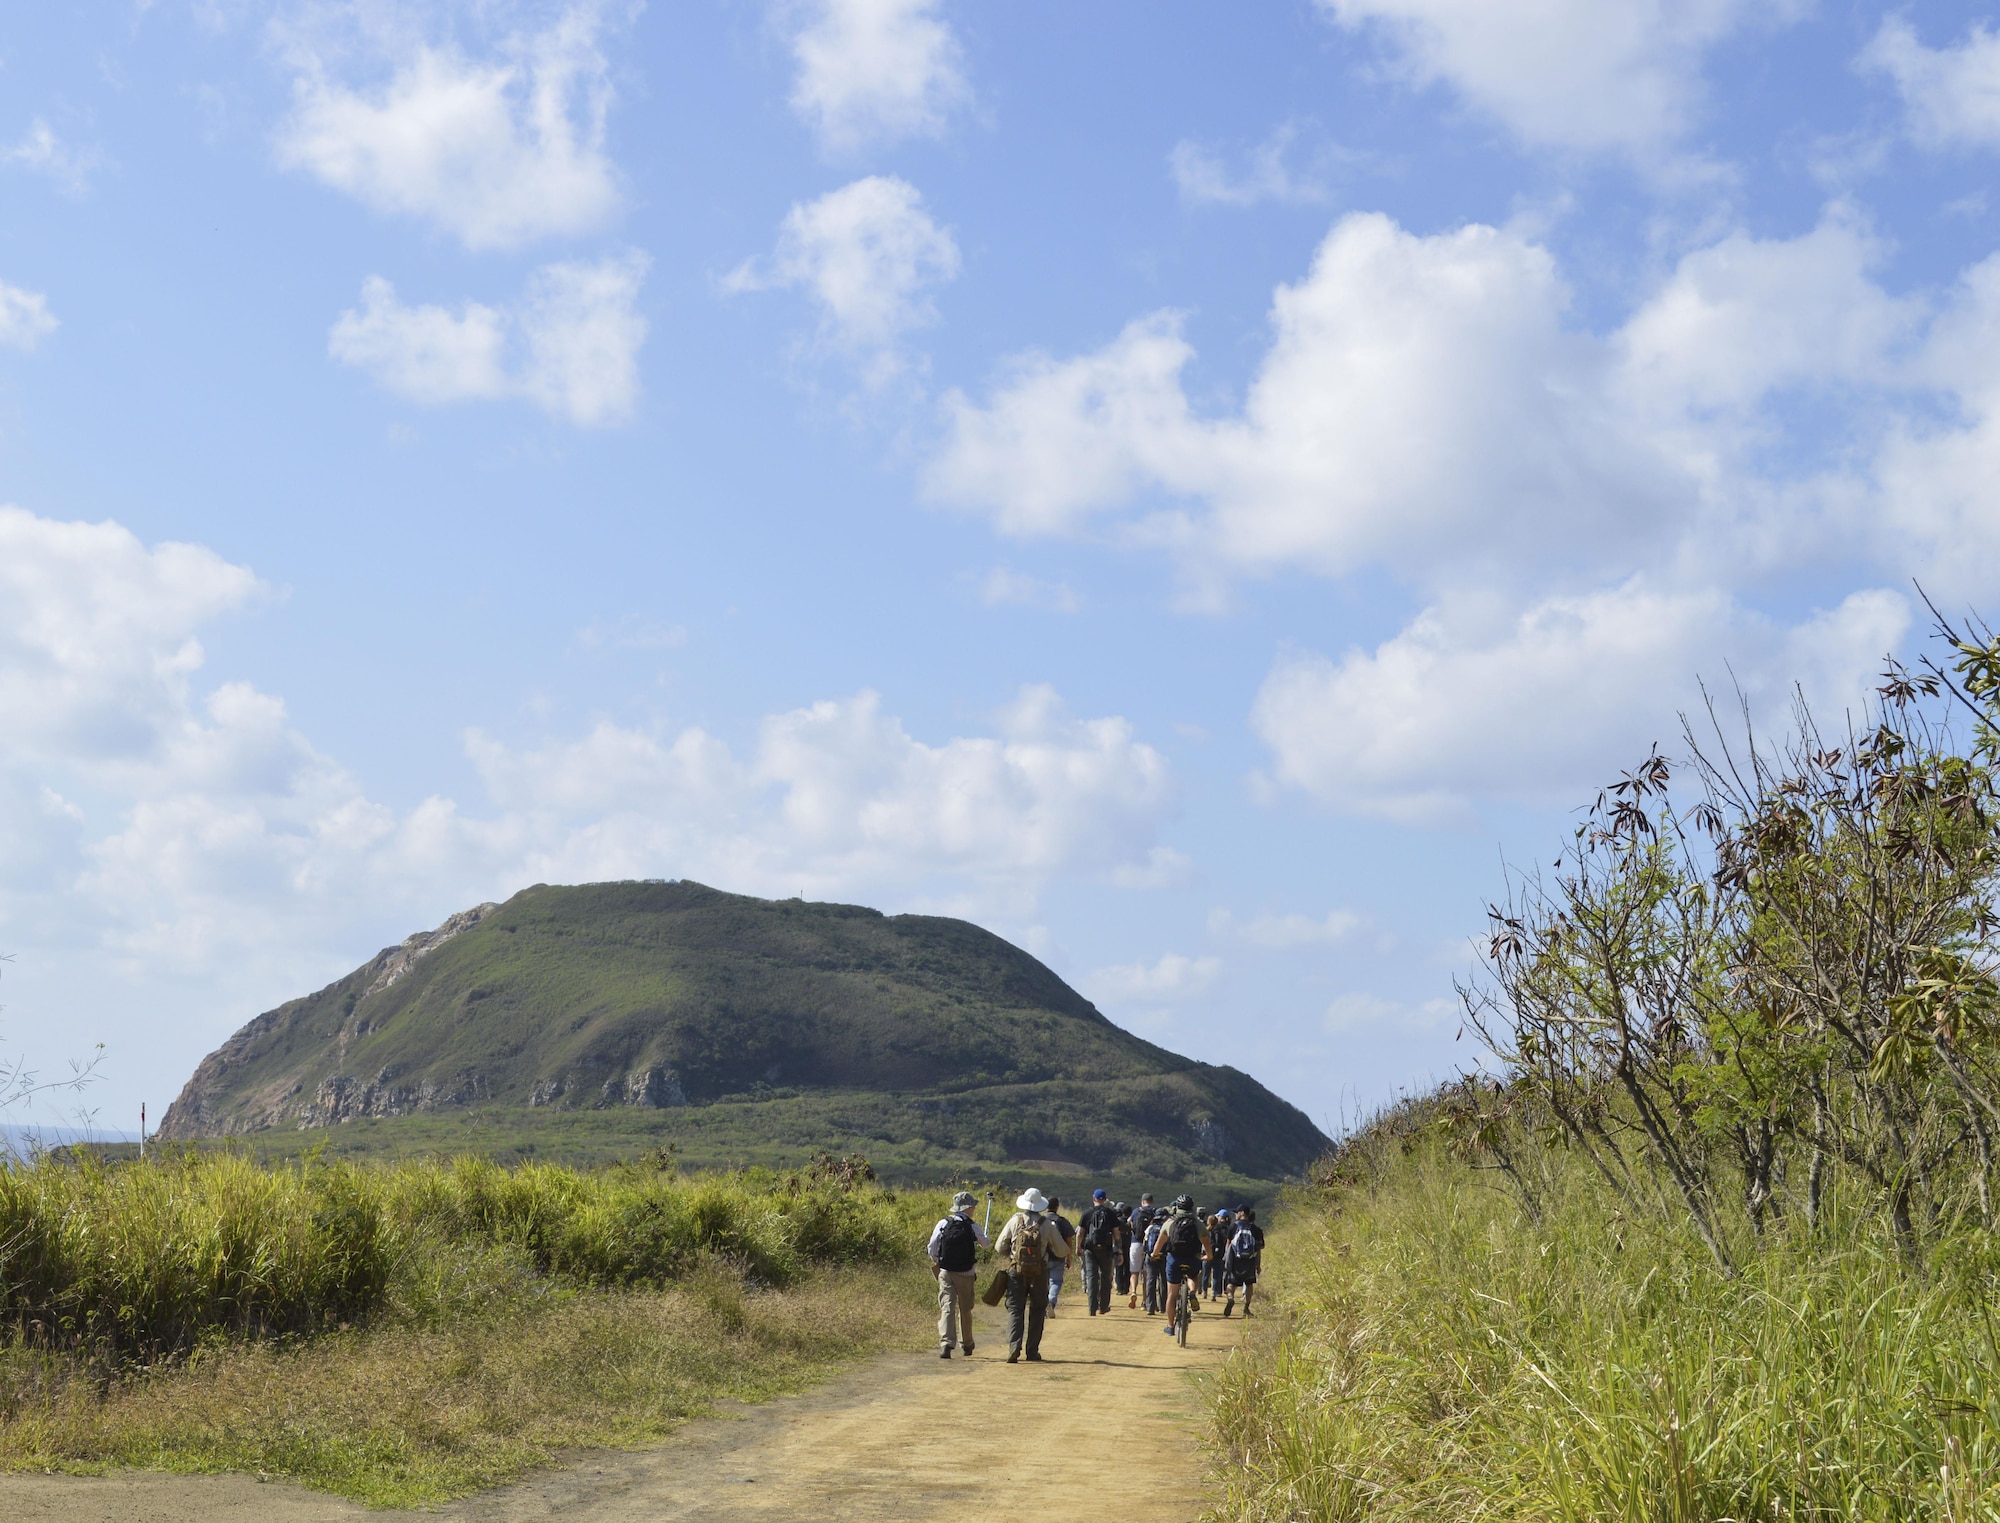 U.S. Air Force Airmen from Kadena Air Base, Japan, walk along a trail to Mount Suribachi, Iwo Jima, Jan. 12, 2017. Airmen from different units throughout Kadena were selected for this special trip as part of a professional military education outing to learn about the battle of Iwo Jima. (U.S. Air Force photo by Senior Airman Lynette M. Rolen/Released)